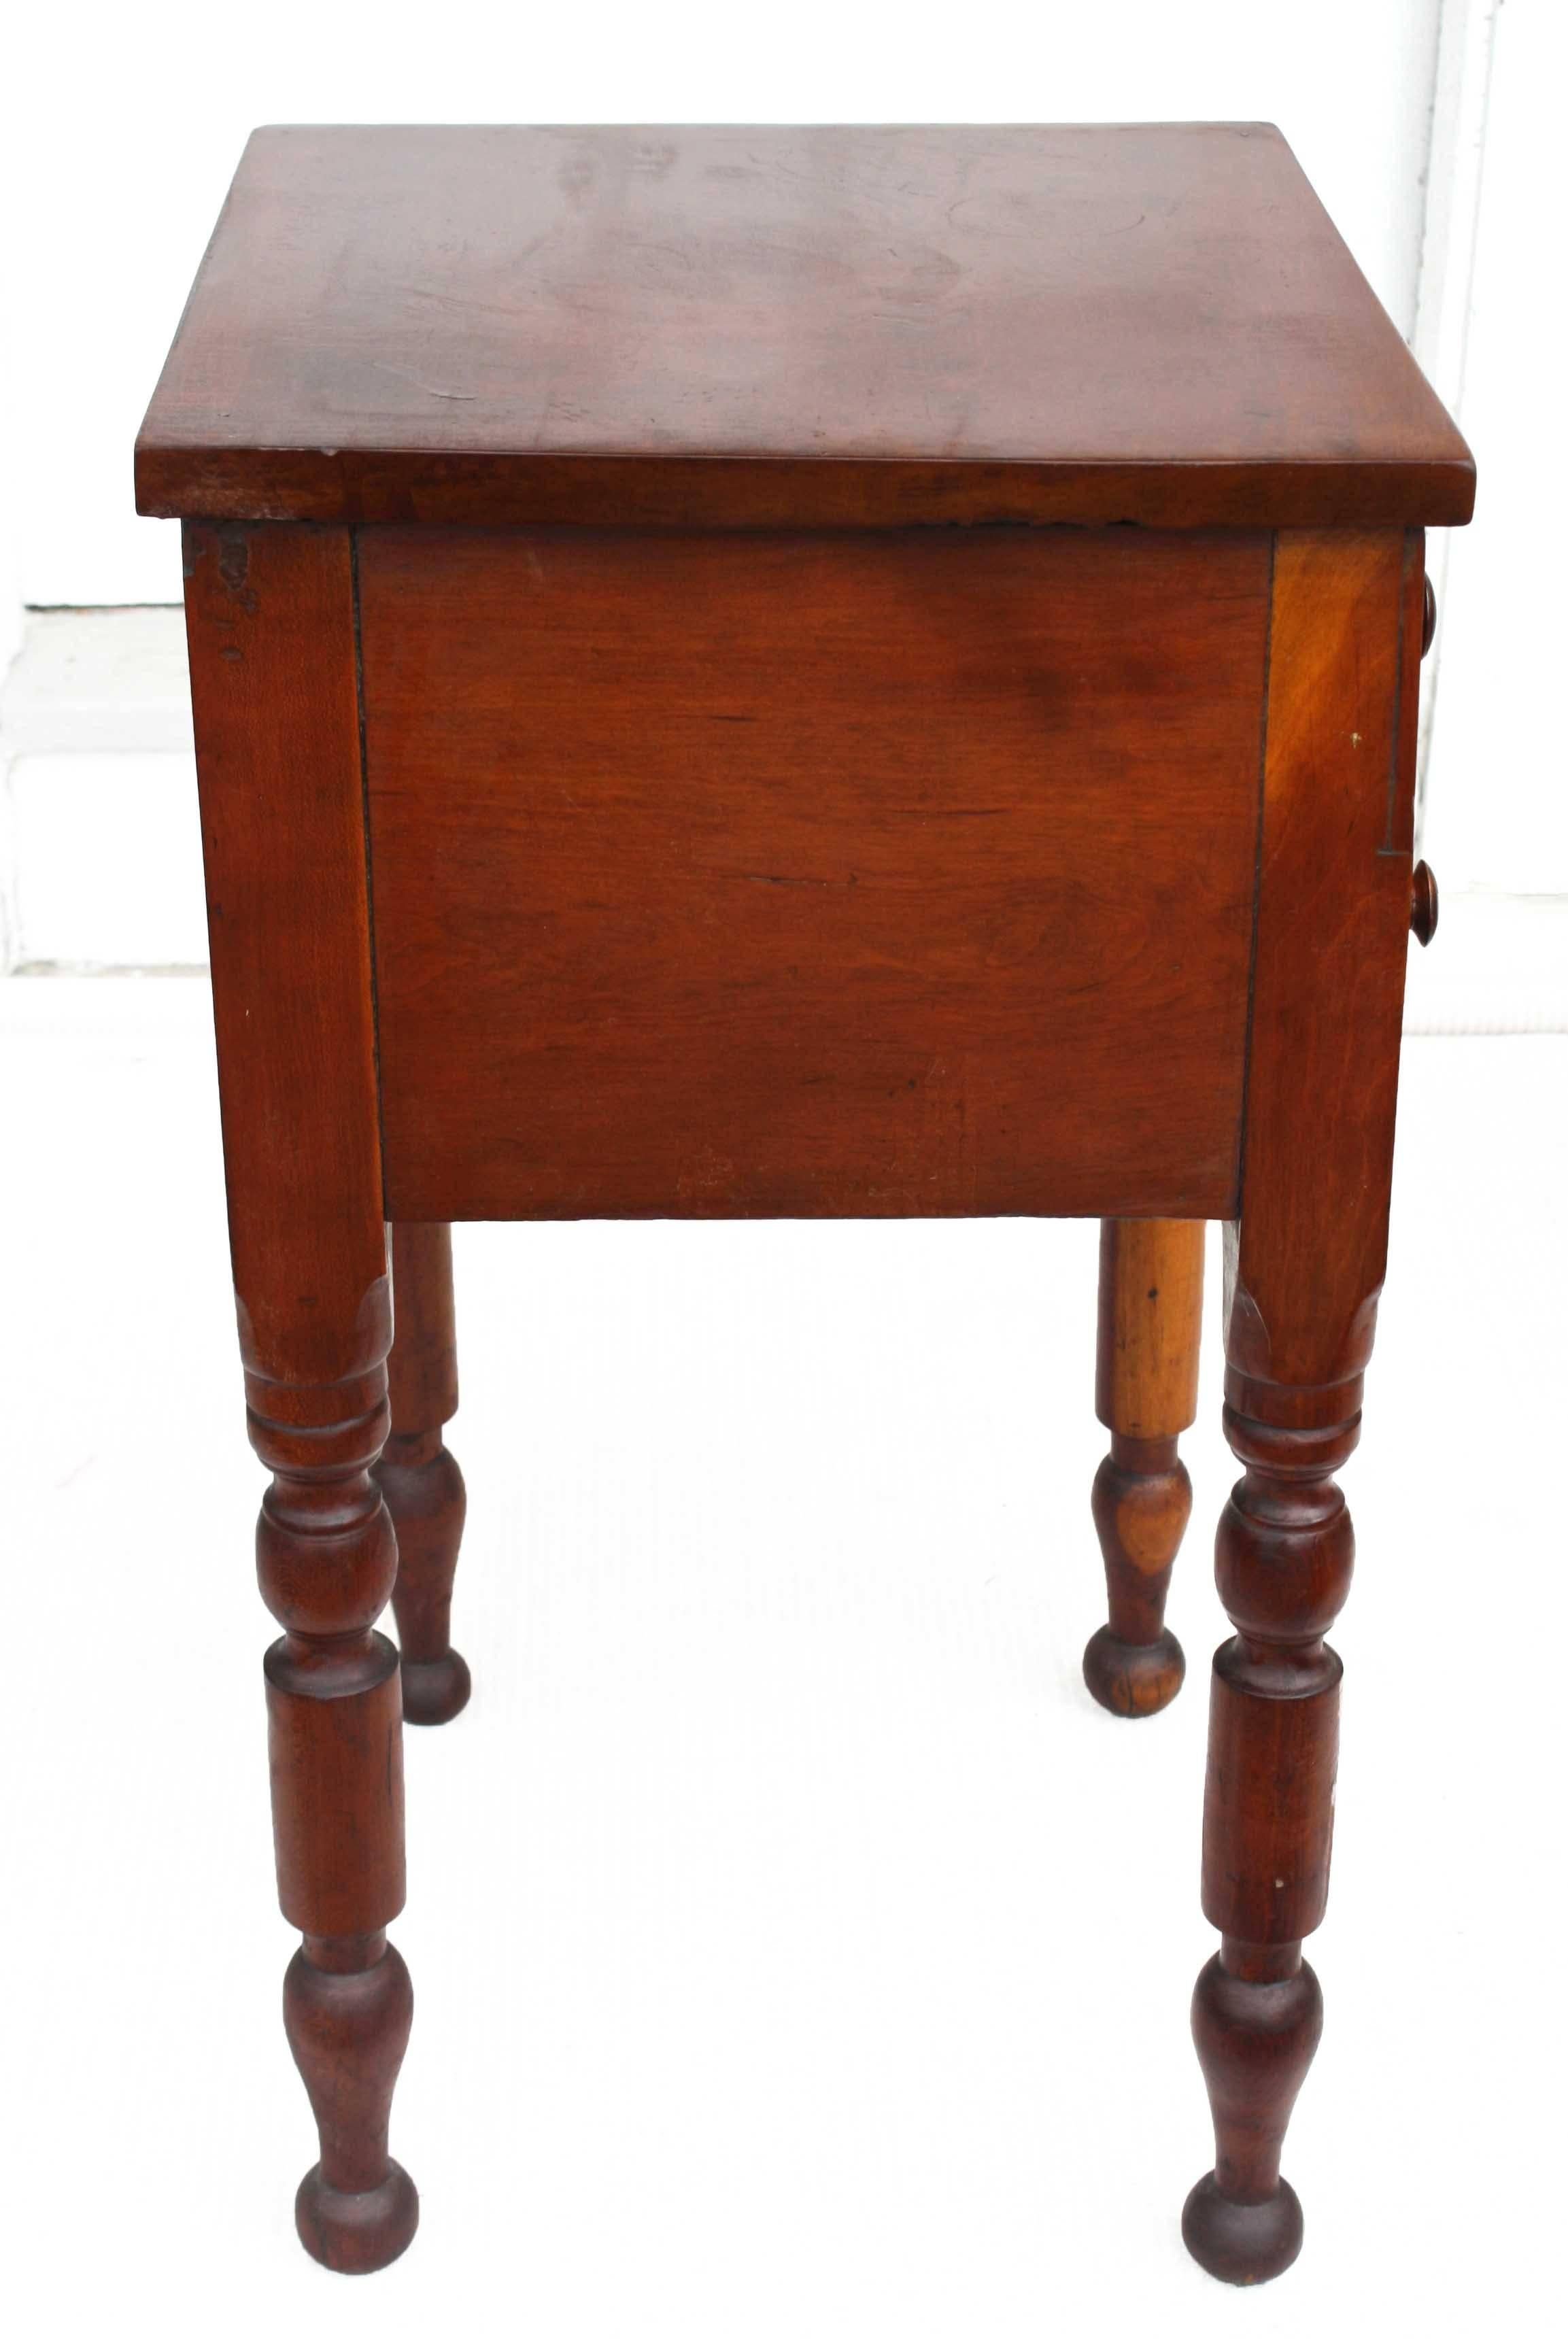 American Classical Baluster Legged Cherrywood Side Table For Sale 1